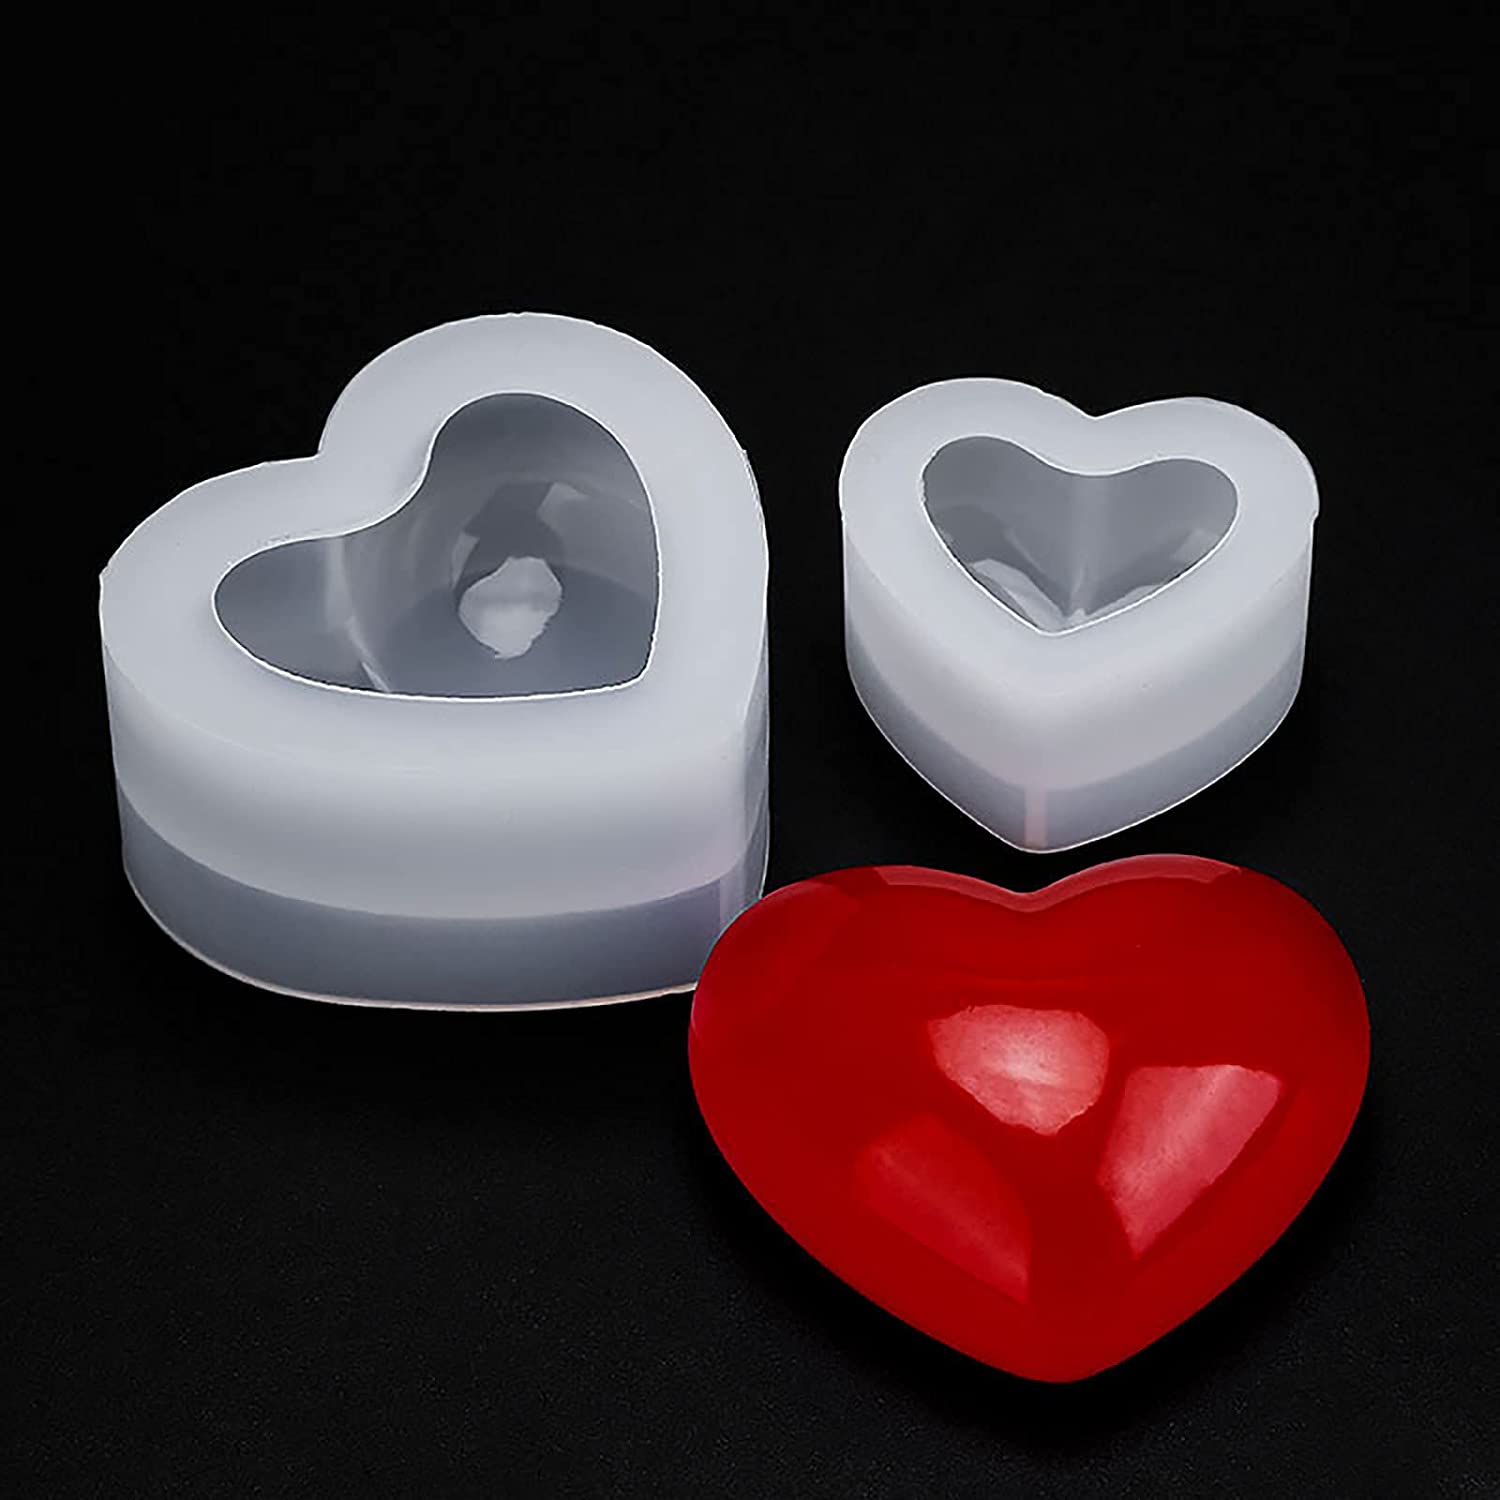 2-Pcs-Love-Heart-Shape-Silicone-Mold-Silicone-Moulds-3D-Heart-Soap-Mold-for-DIY-Handmade-Soap-Crafts-Silicone-Heart-Pend-B094XZ22RW-5.jpg